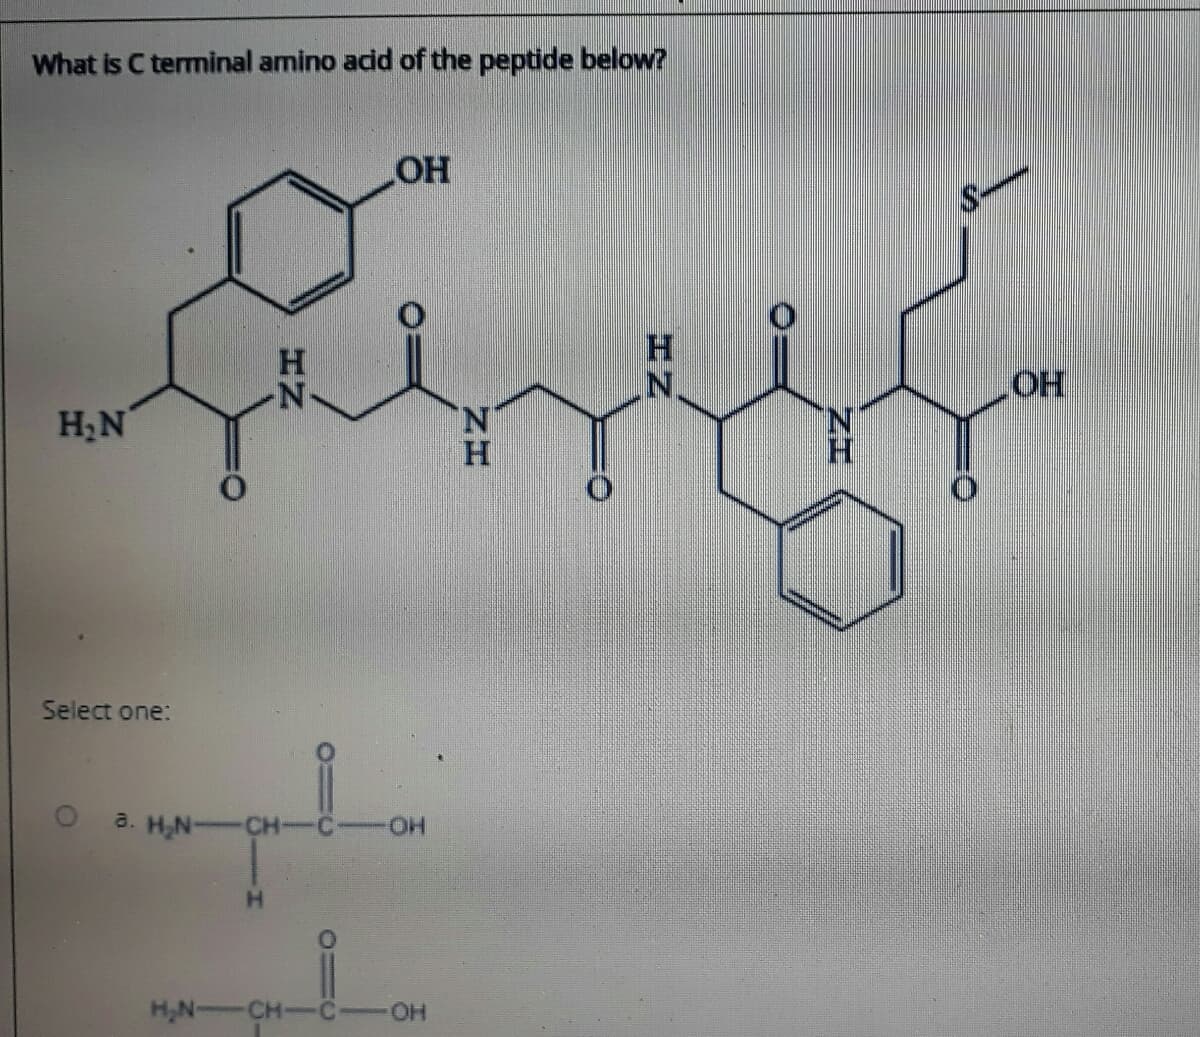 What is C terminal amino adid of the peptide below?
HO
N.
HO
H2N
N.
N.
Select one:
a. H,N-CH-
O
H,N-CH-C
OH
